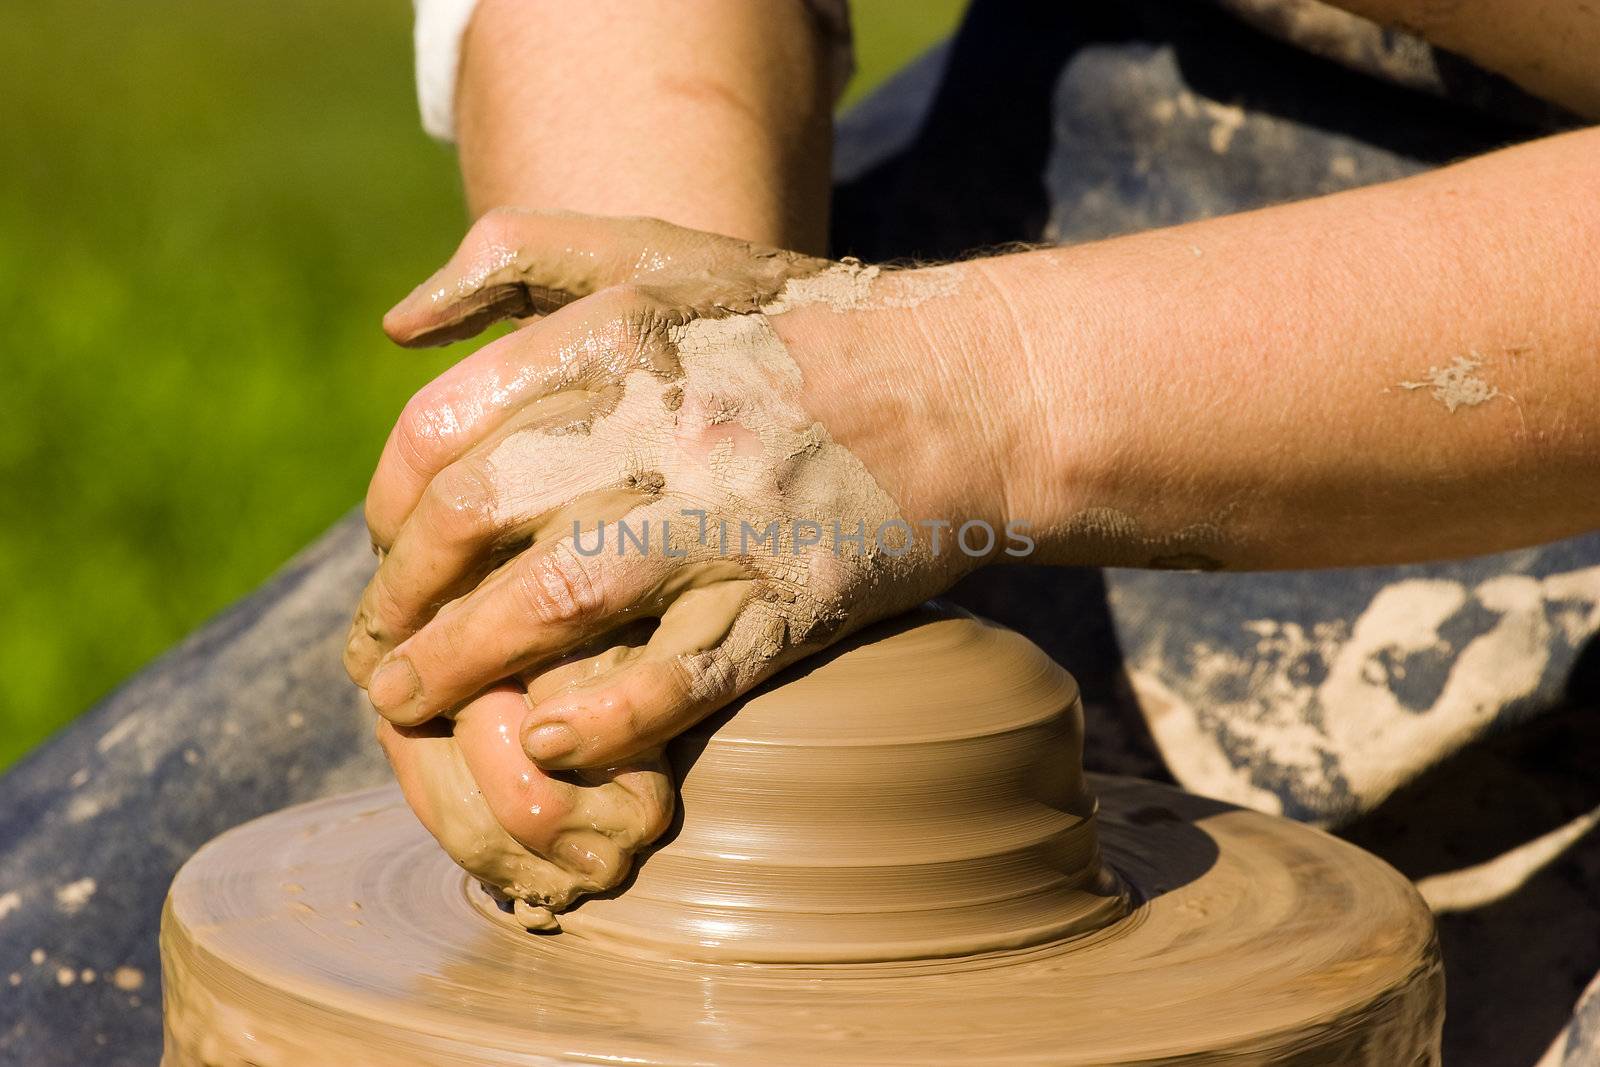 Potters hands starting to make new ceramic object